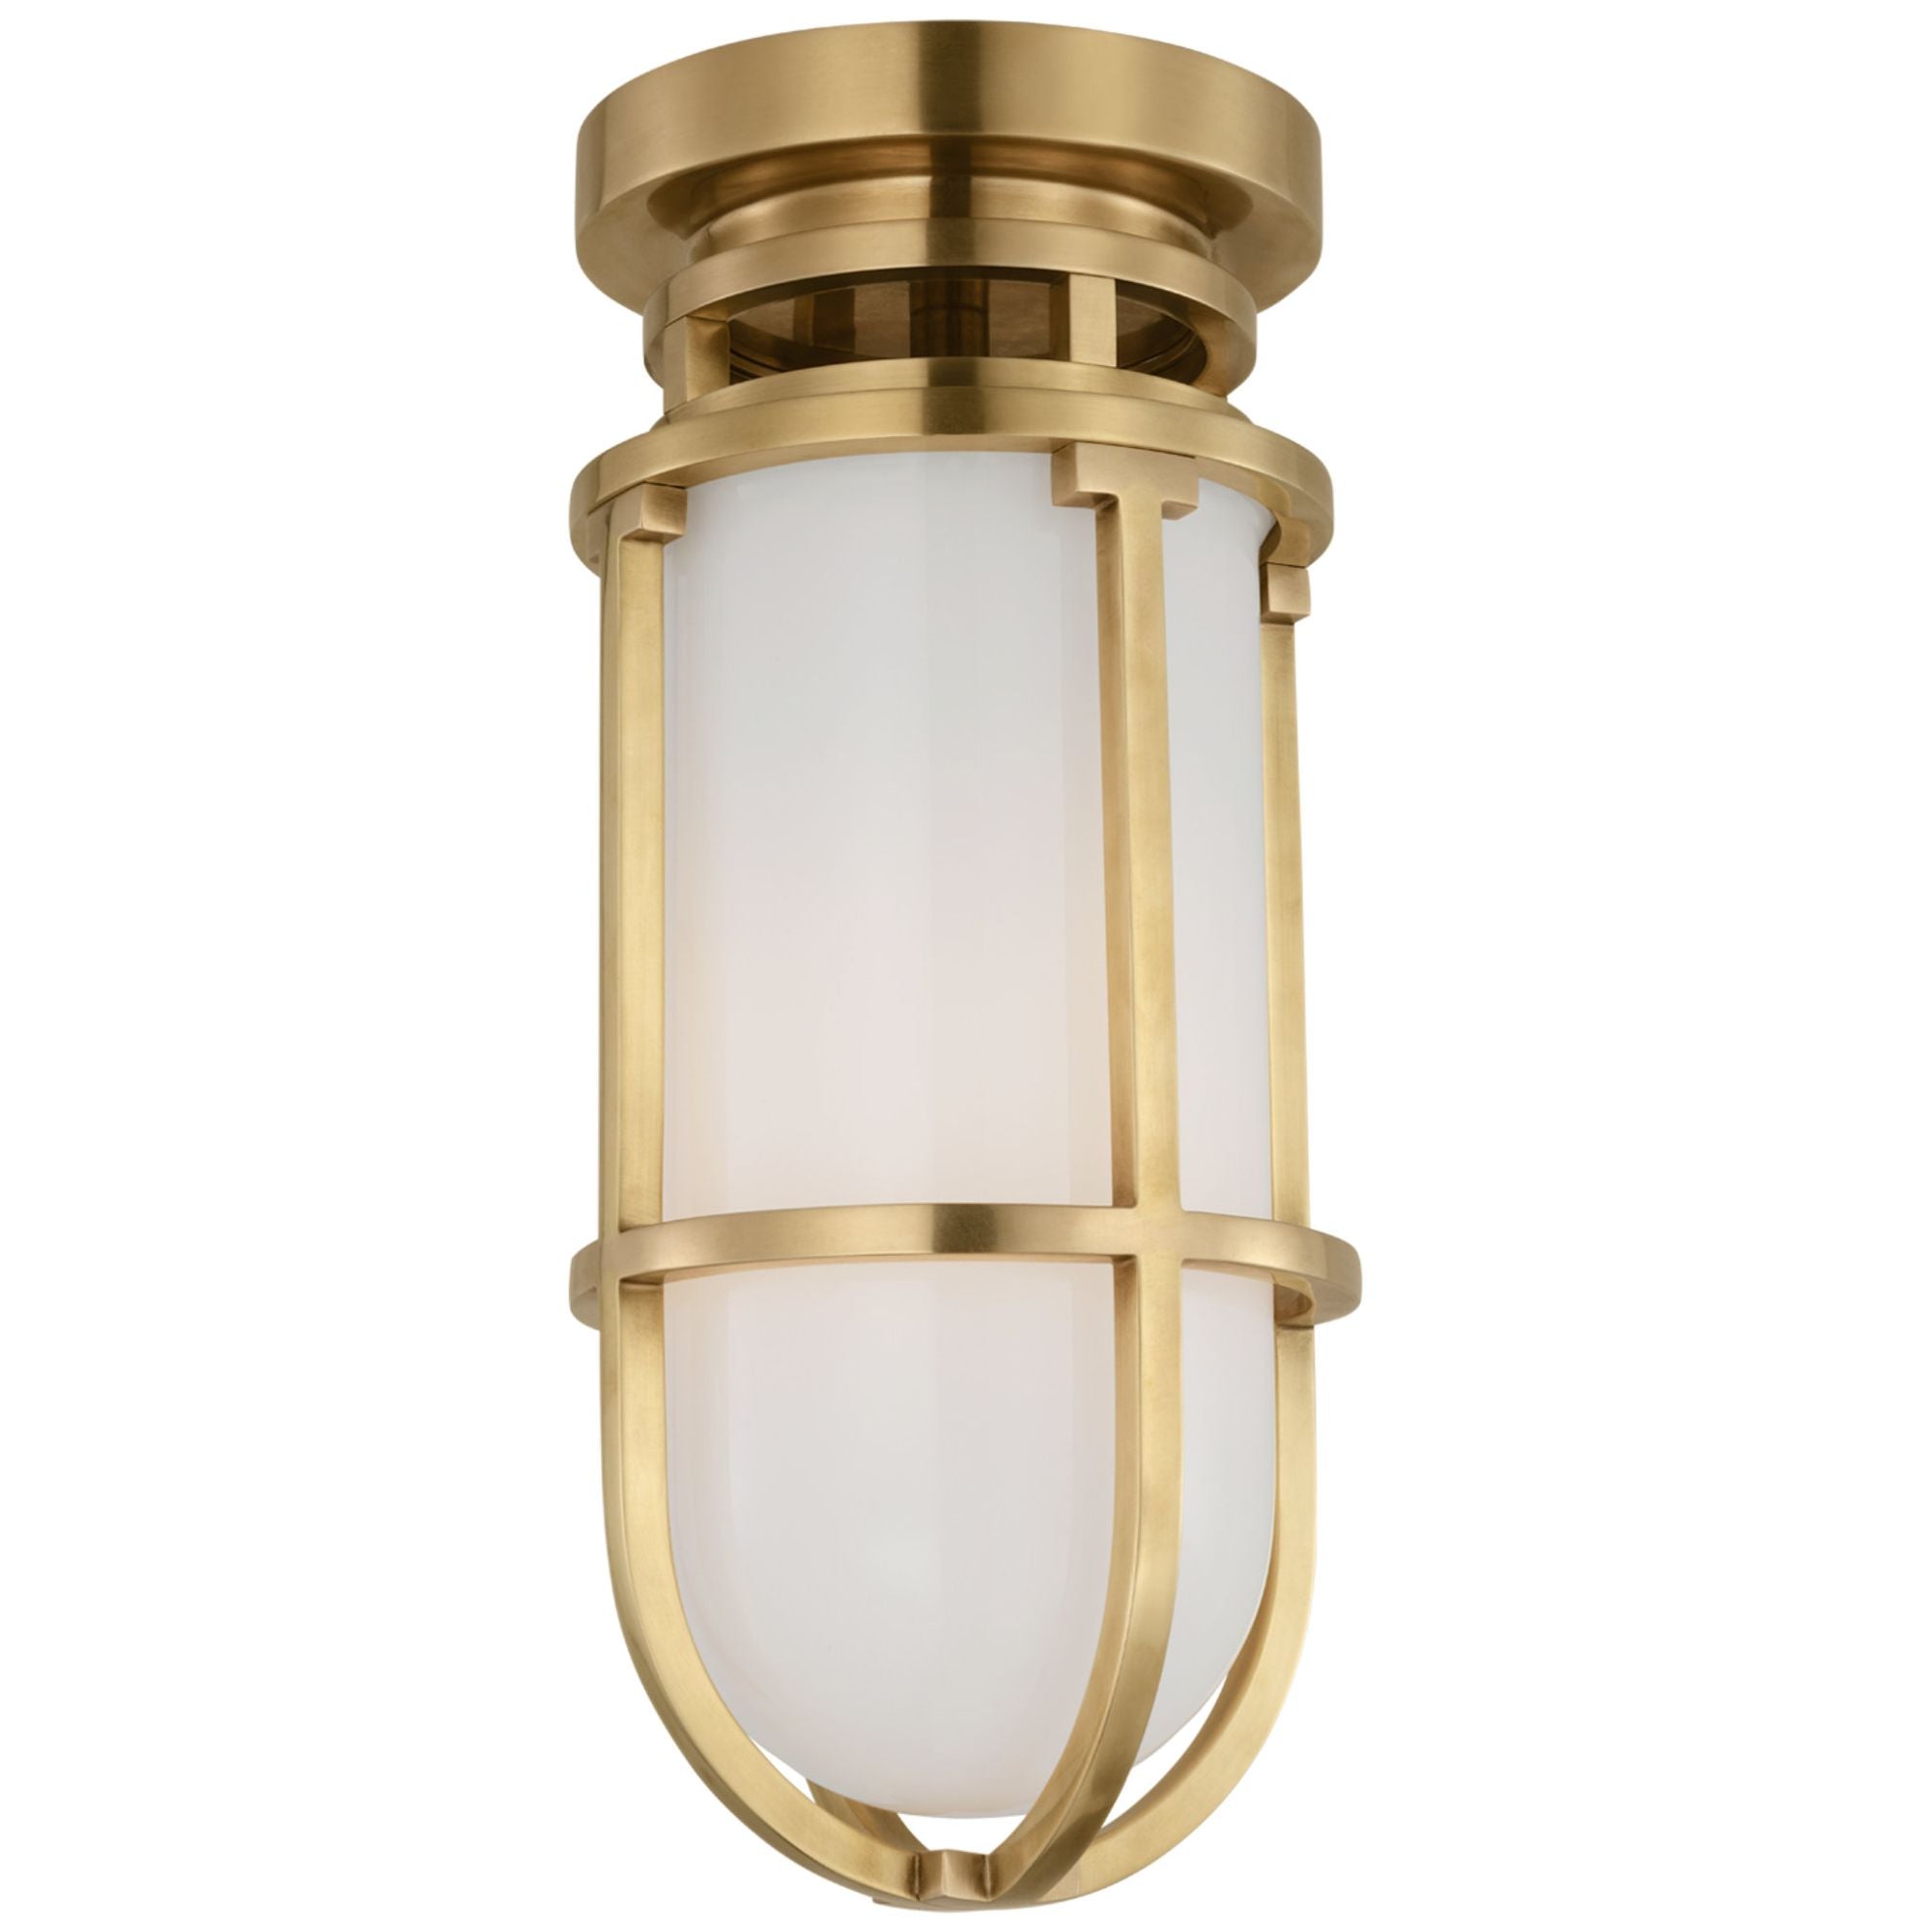 Chapman & Myers Gracie Tall Flush Mount in Antique-Burnished Brass with White Glass